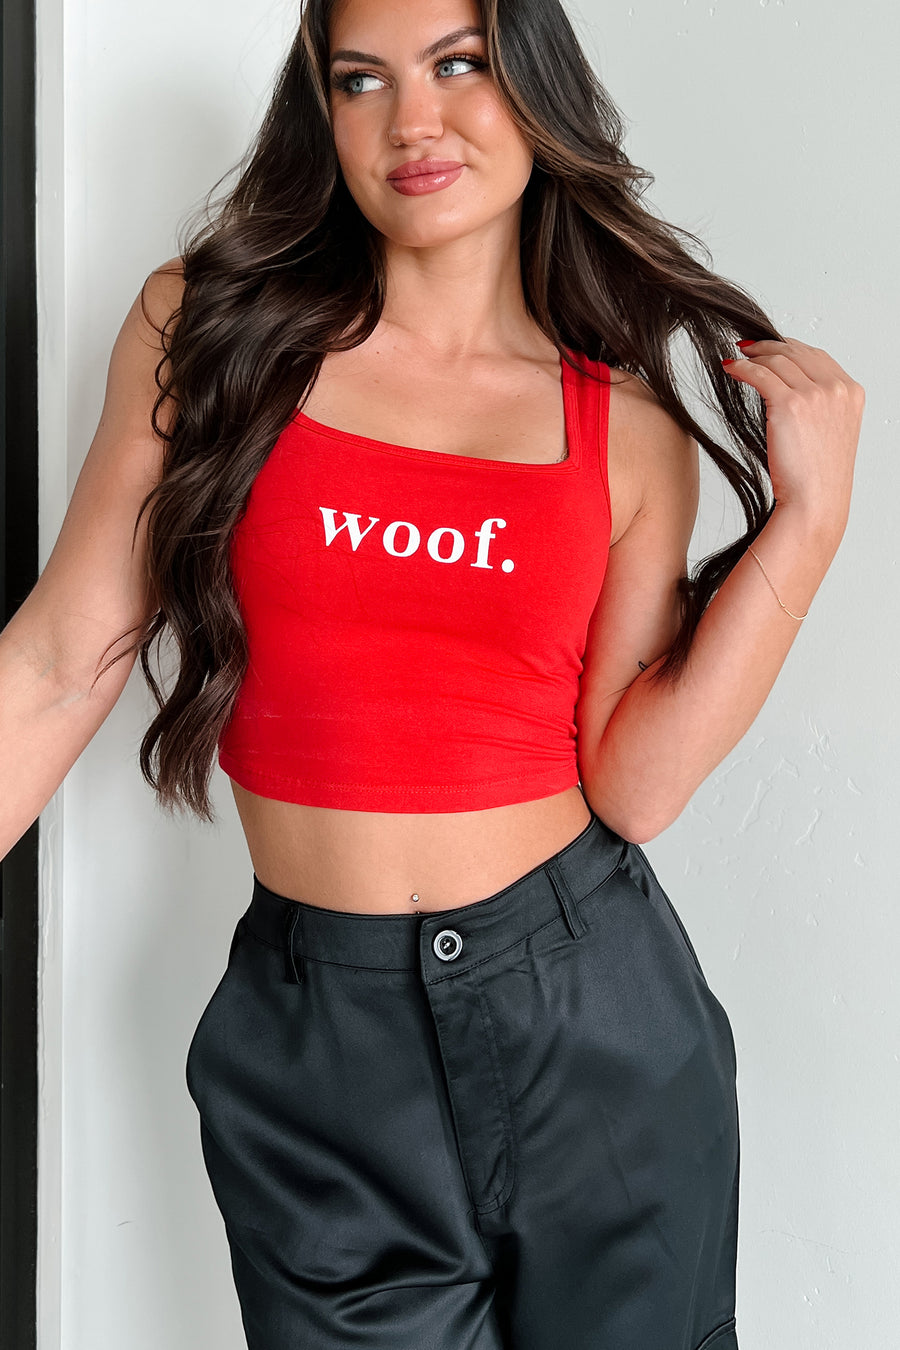 "Woof." Square Neck Crop Top (Red)